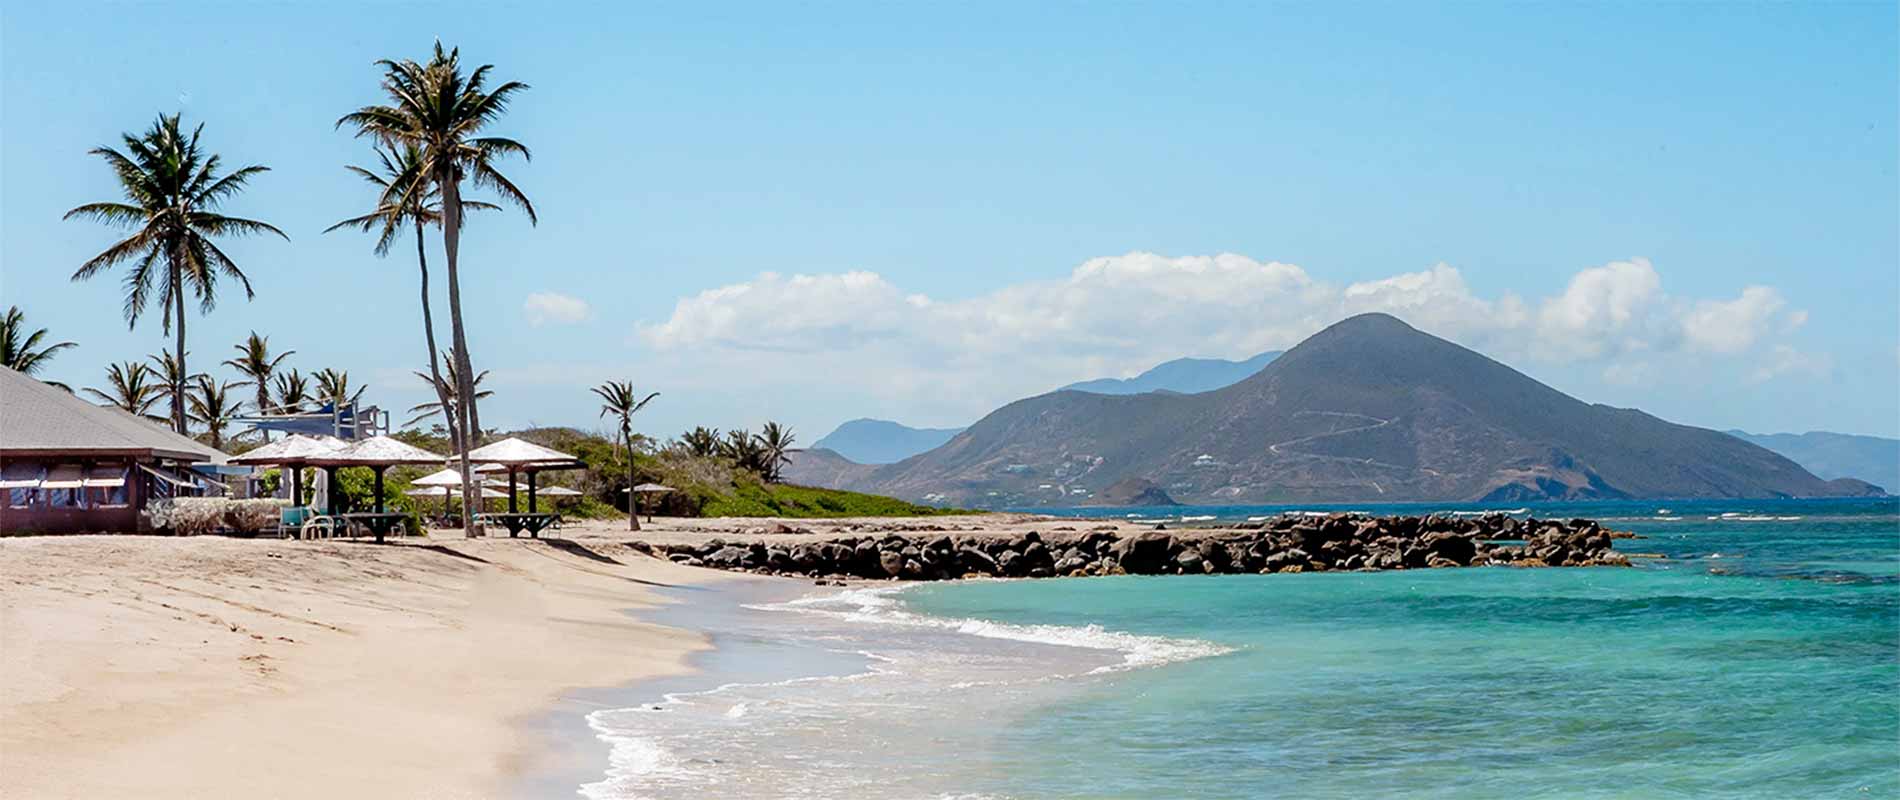 Beaches and Bays of Nevis - St Kitts and Nevis visitor guide